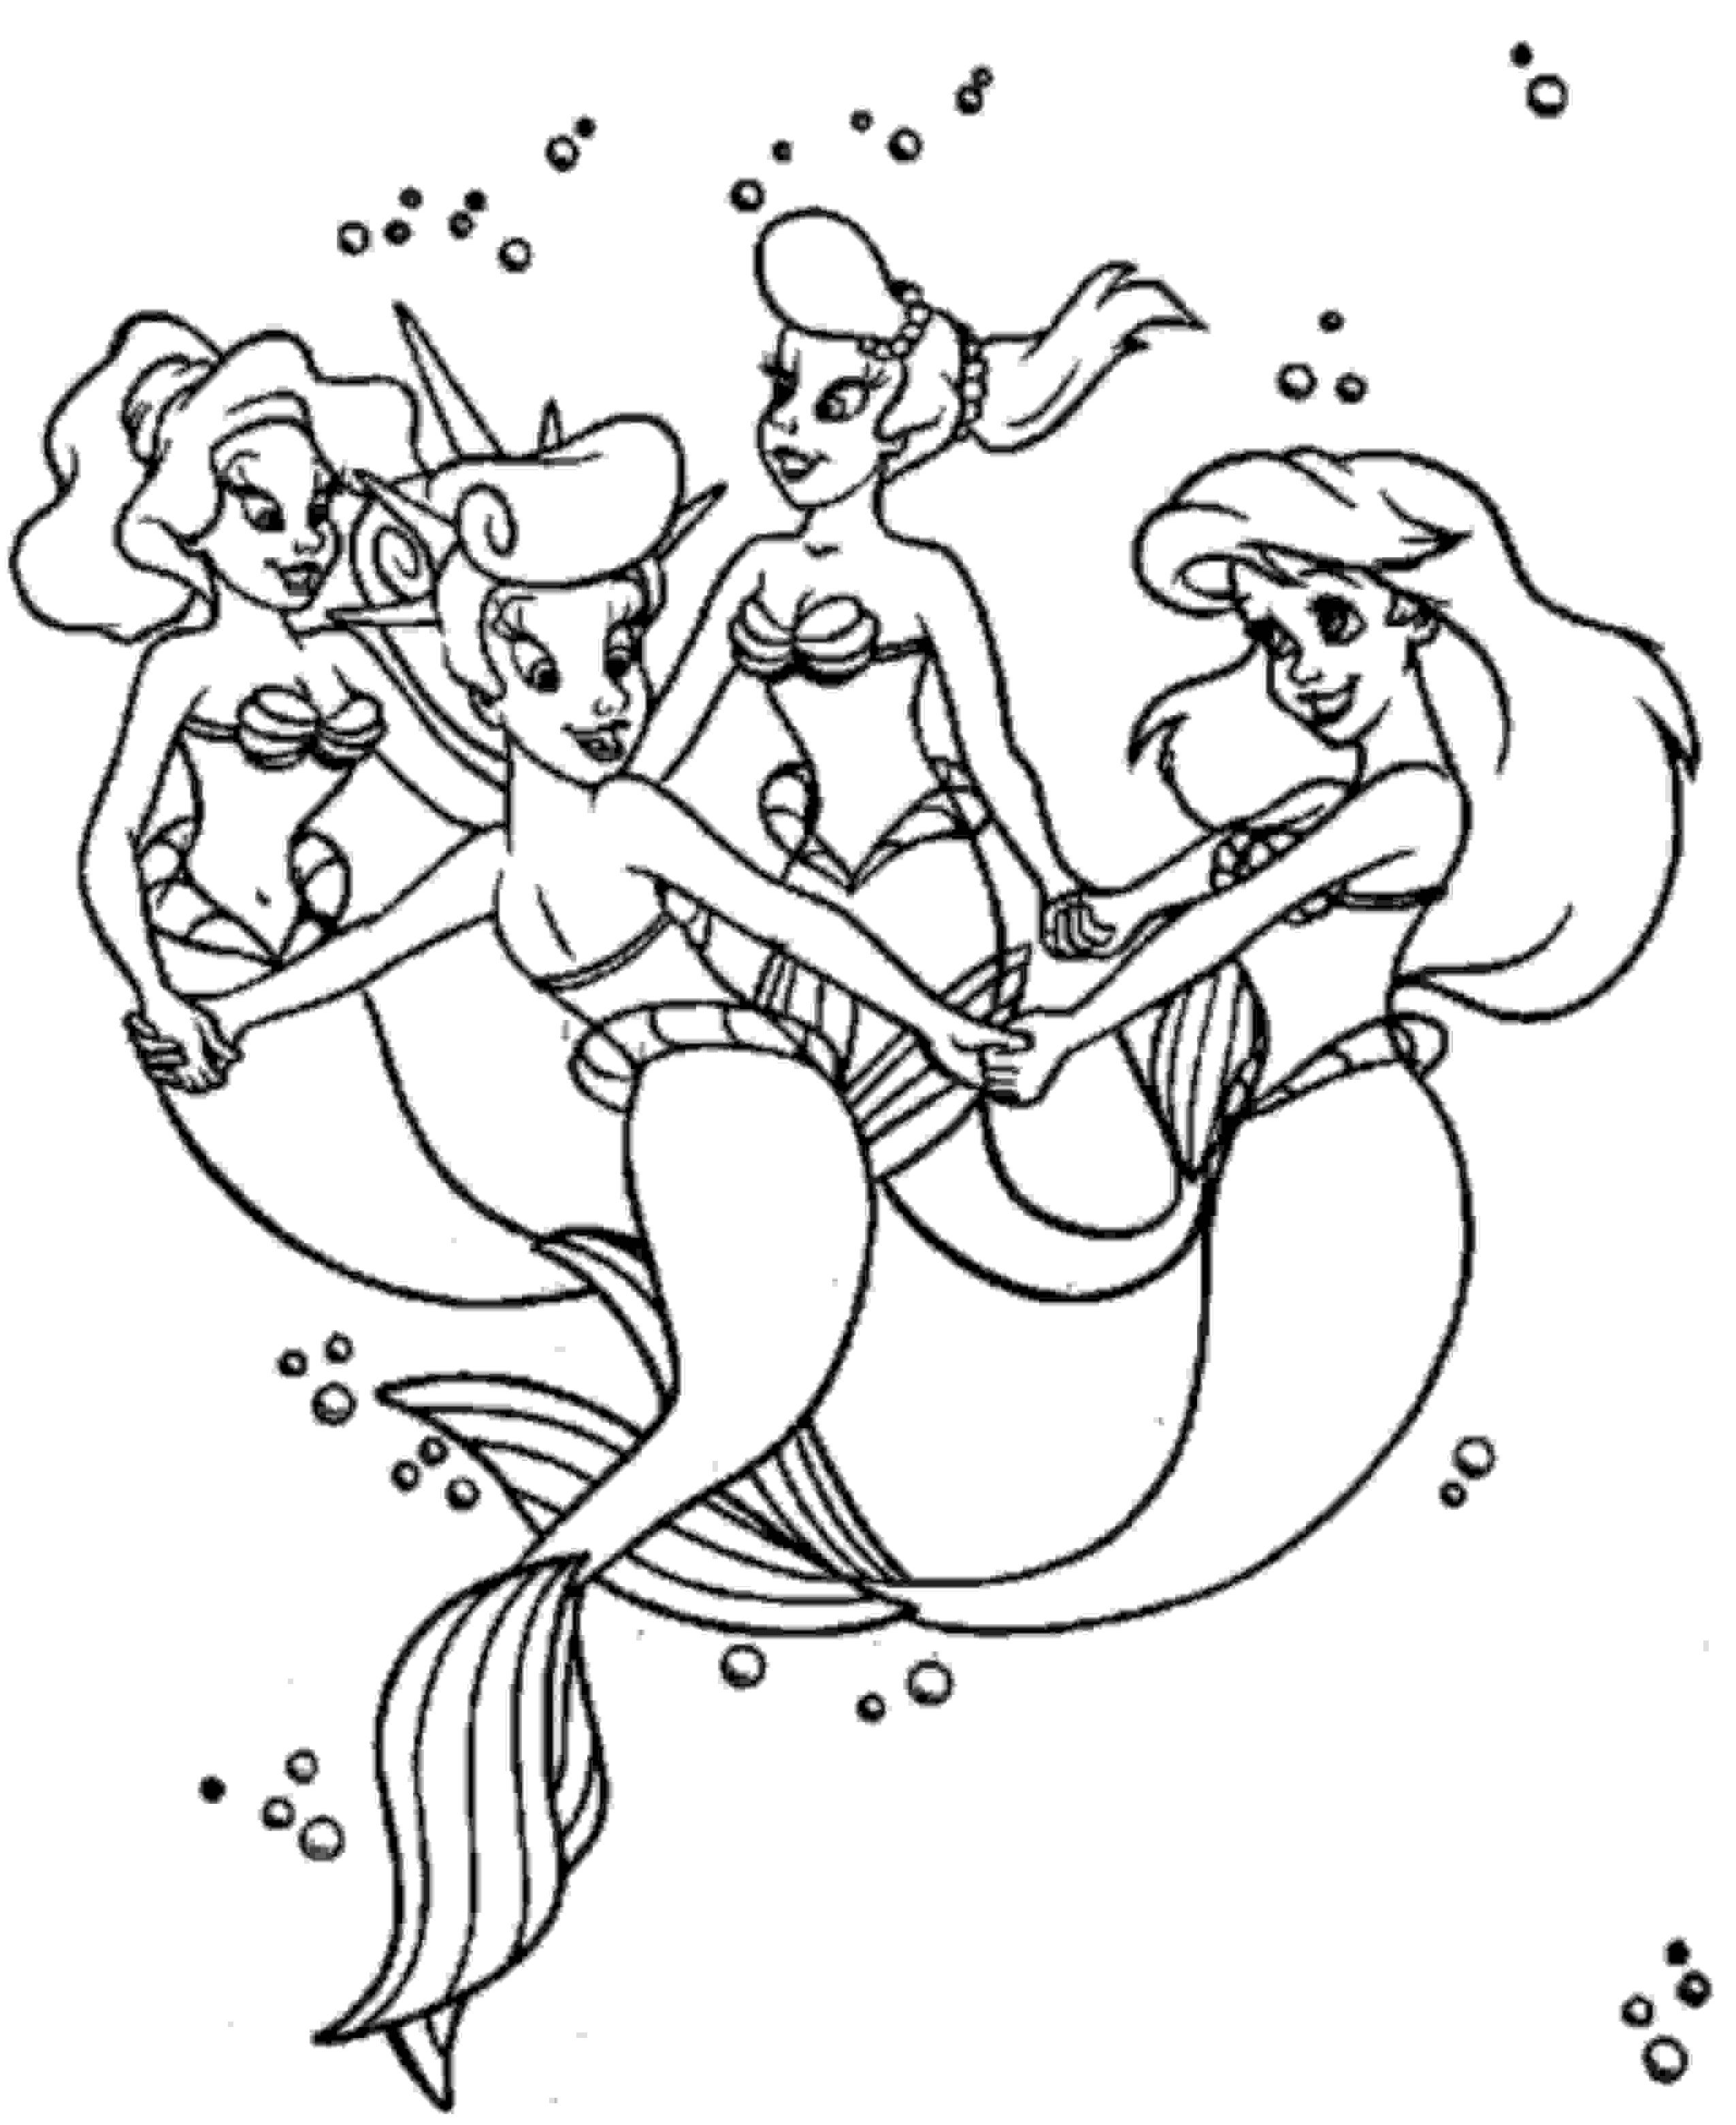 Dora Mermaid Coloring Pages at GetColoringscom Free